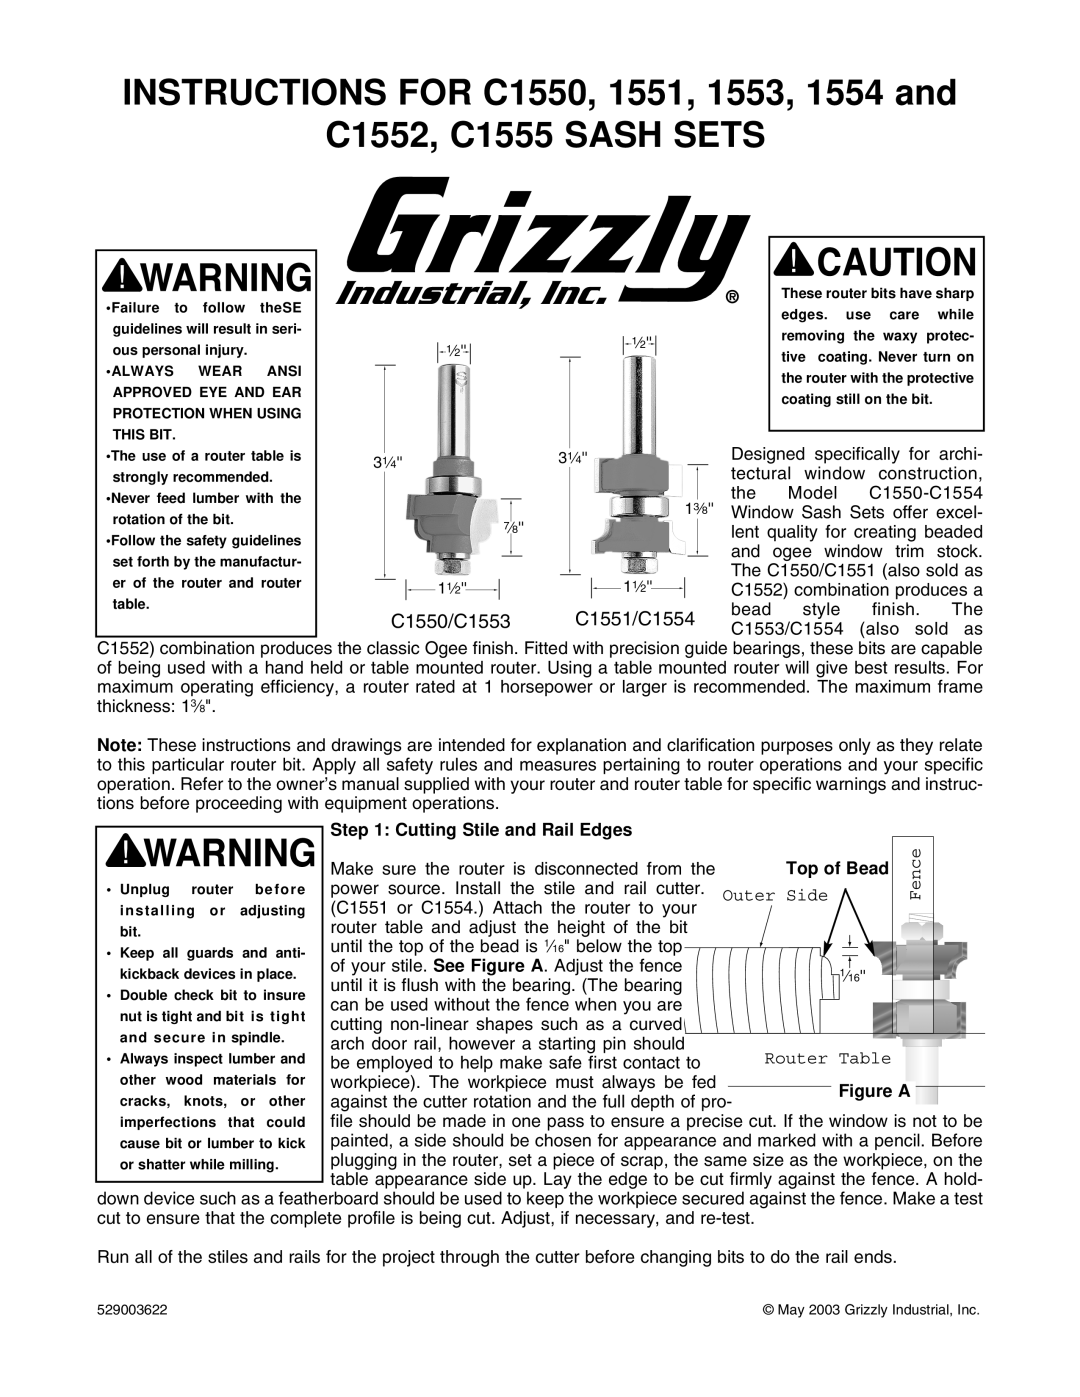 Grizzly 1554, C1550, C1555, 1551, C1552, 1553 owner manual Cutting Stile and Rail Edges, Top of Bead, Figure A 